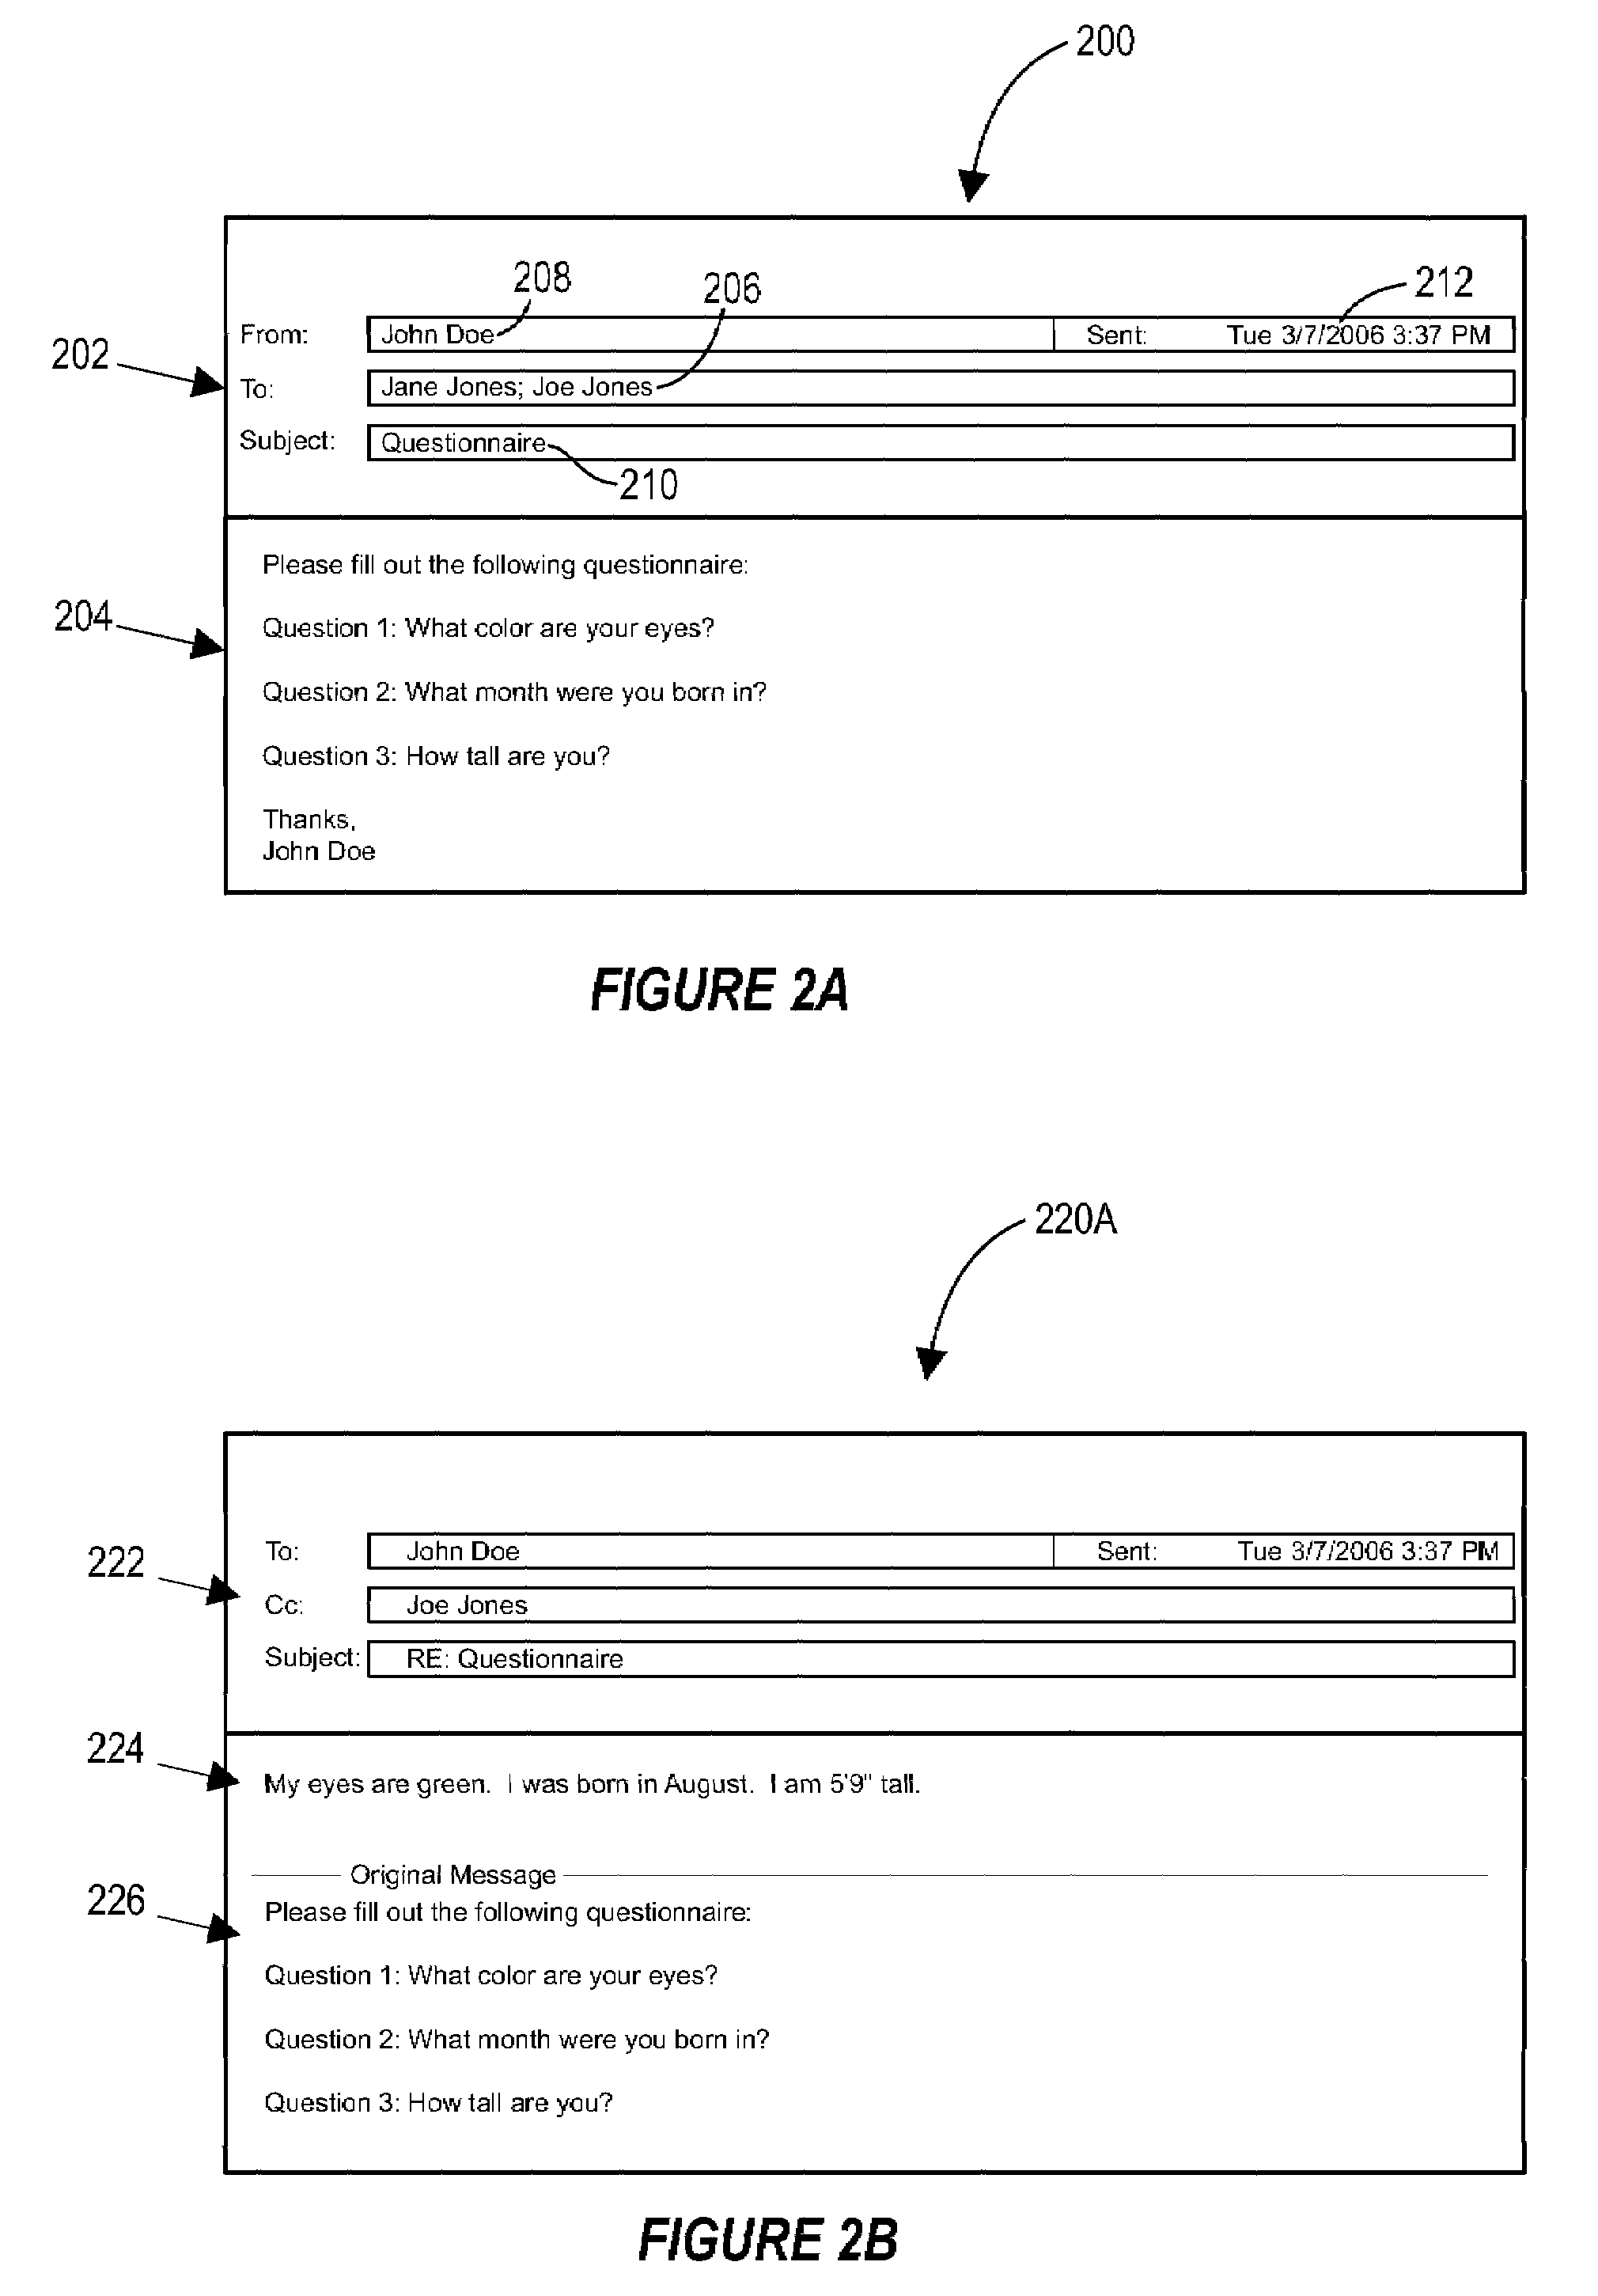 Displaying complex messaging threads into a single display